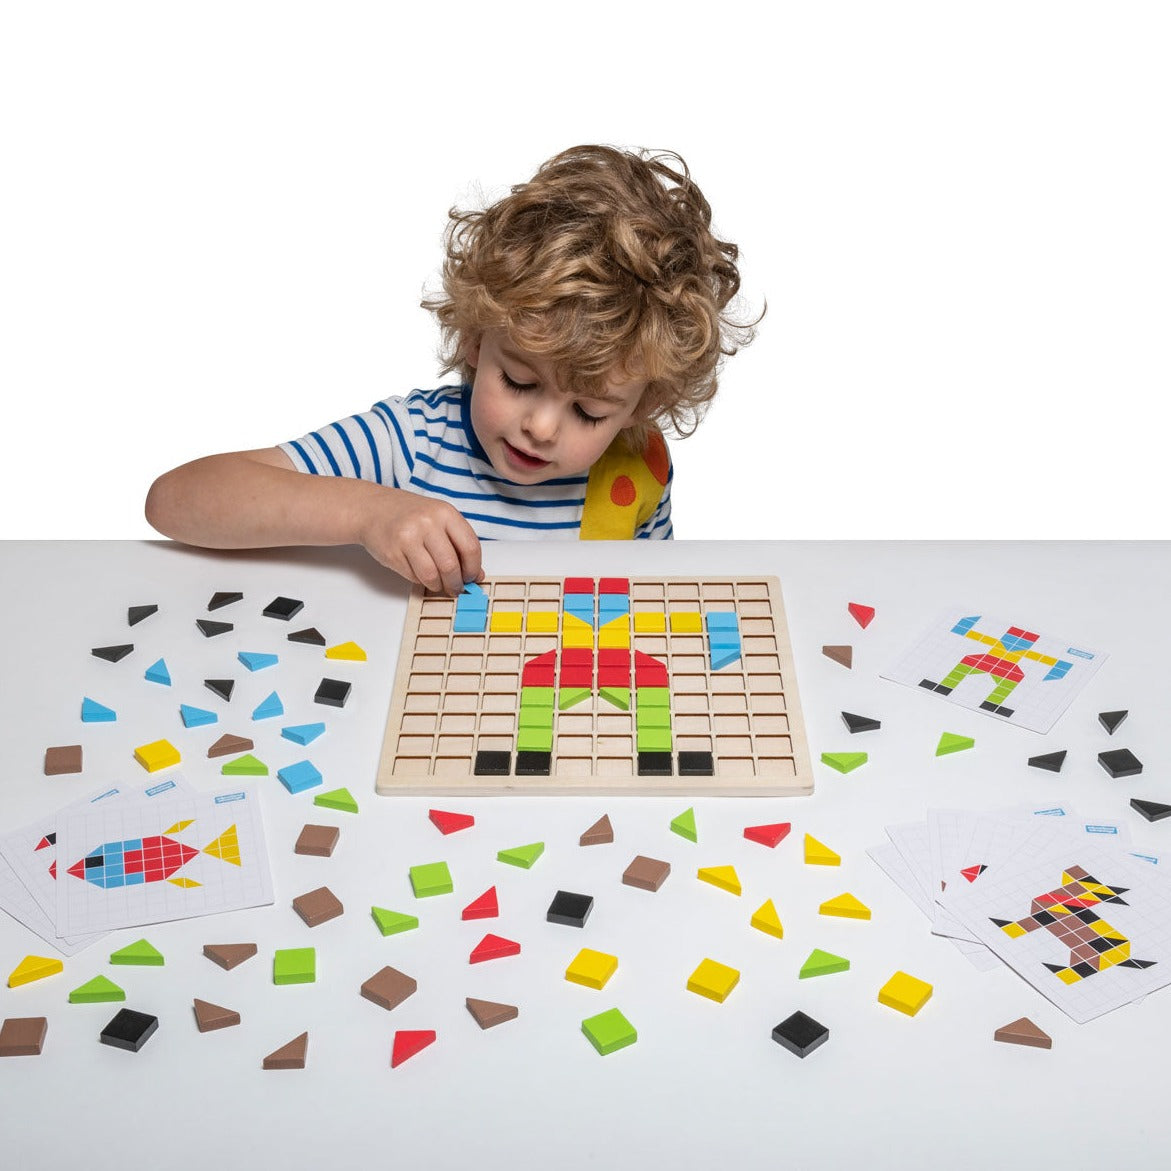 Wooden Mosaic Set,The 116 piece Wooden Mosaic Set is a fantastic way for children to engage in creative and stimulating play, while also developing important skills such as fine motor control, problem-solving and colour recognition. With a range of 20 designs to choose from, or the freedom to create their own patterns, children will love the challenge of fitting the colourful wooden squares and triangles into the wooden grid. The pieces come in six vibrant colours and are made from sustainably sourced Beech